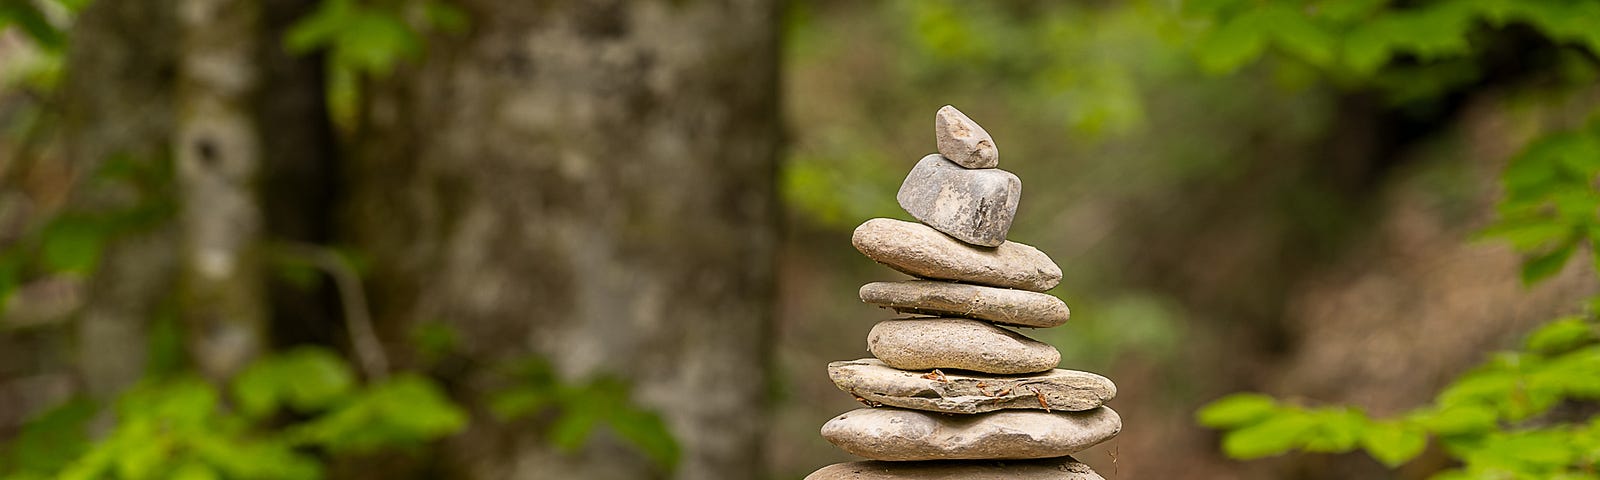 Cairn (pebbles piled on each other) in a forest, on a tree stump